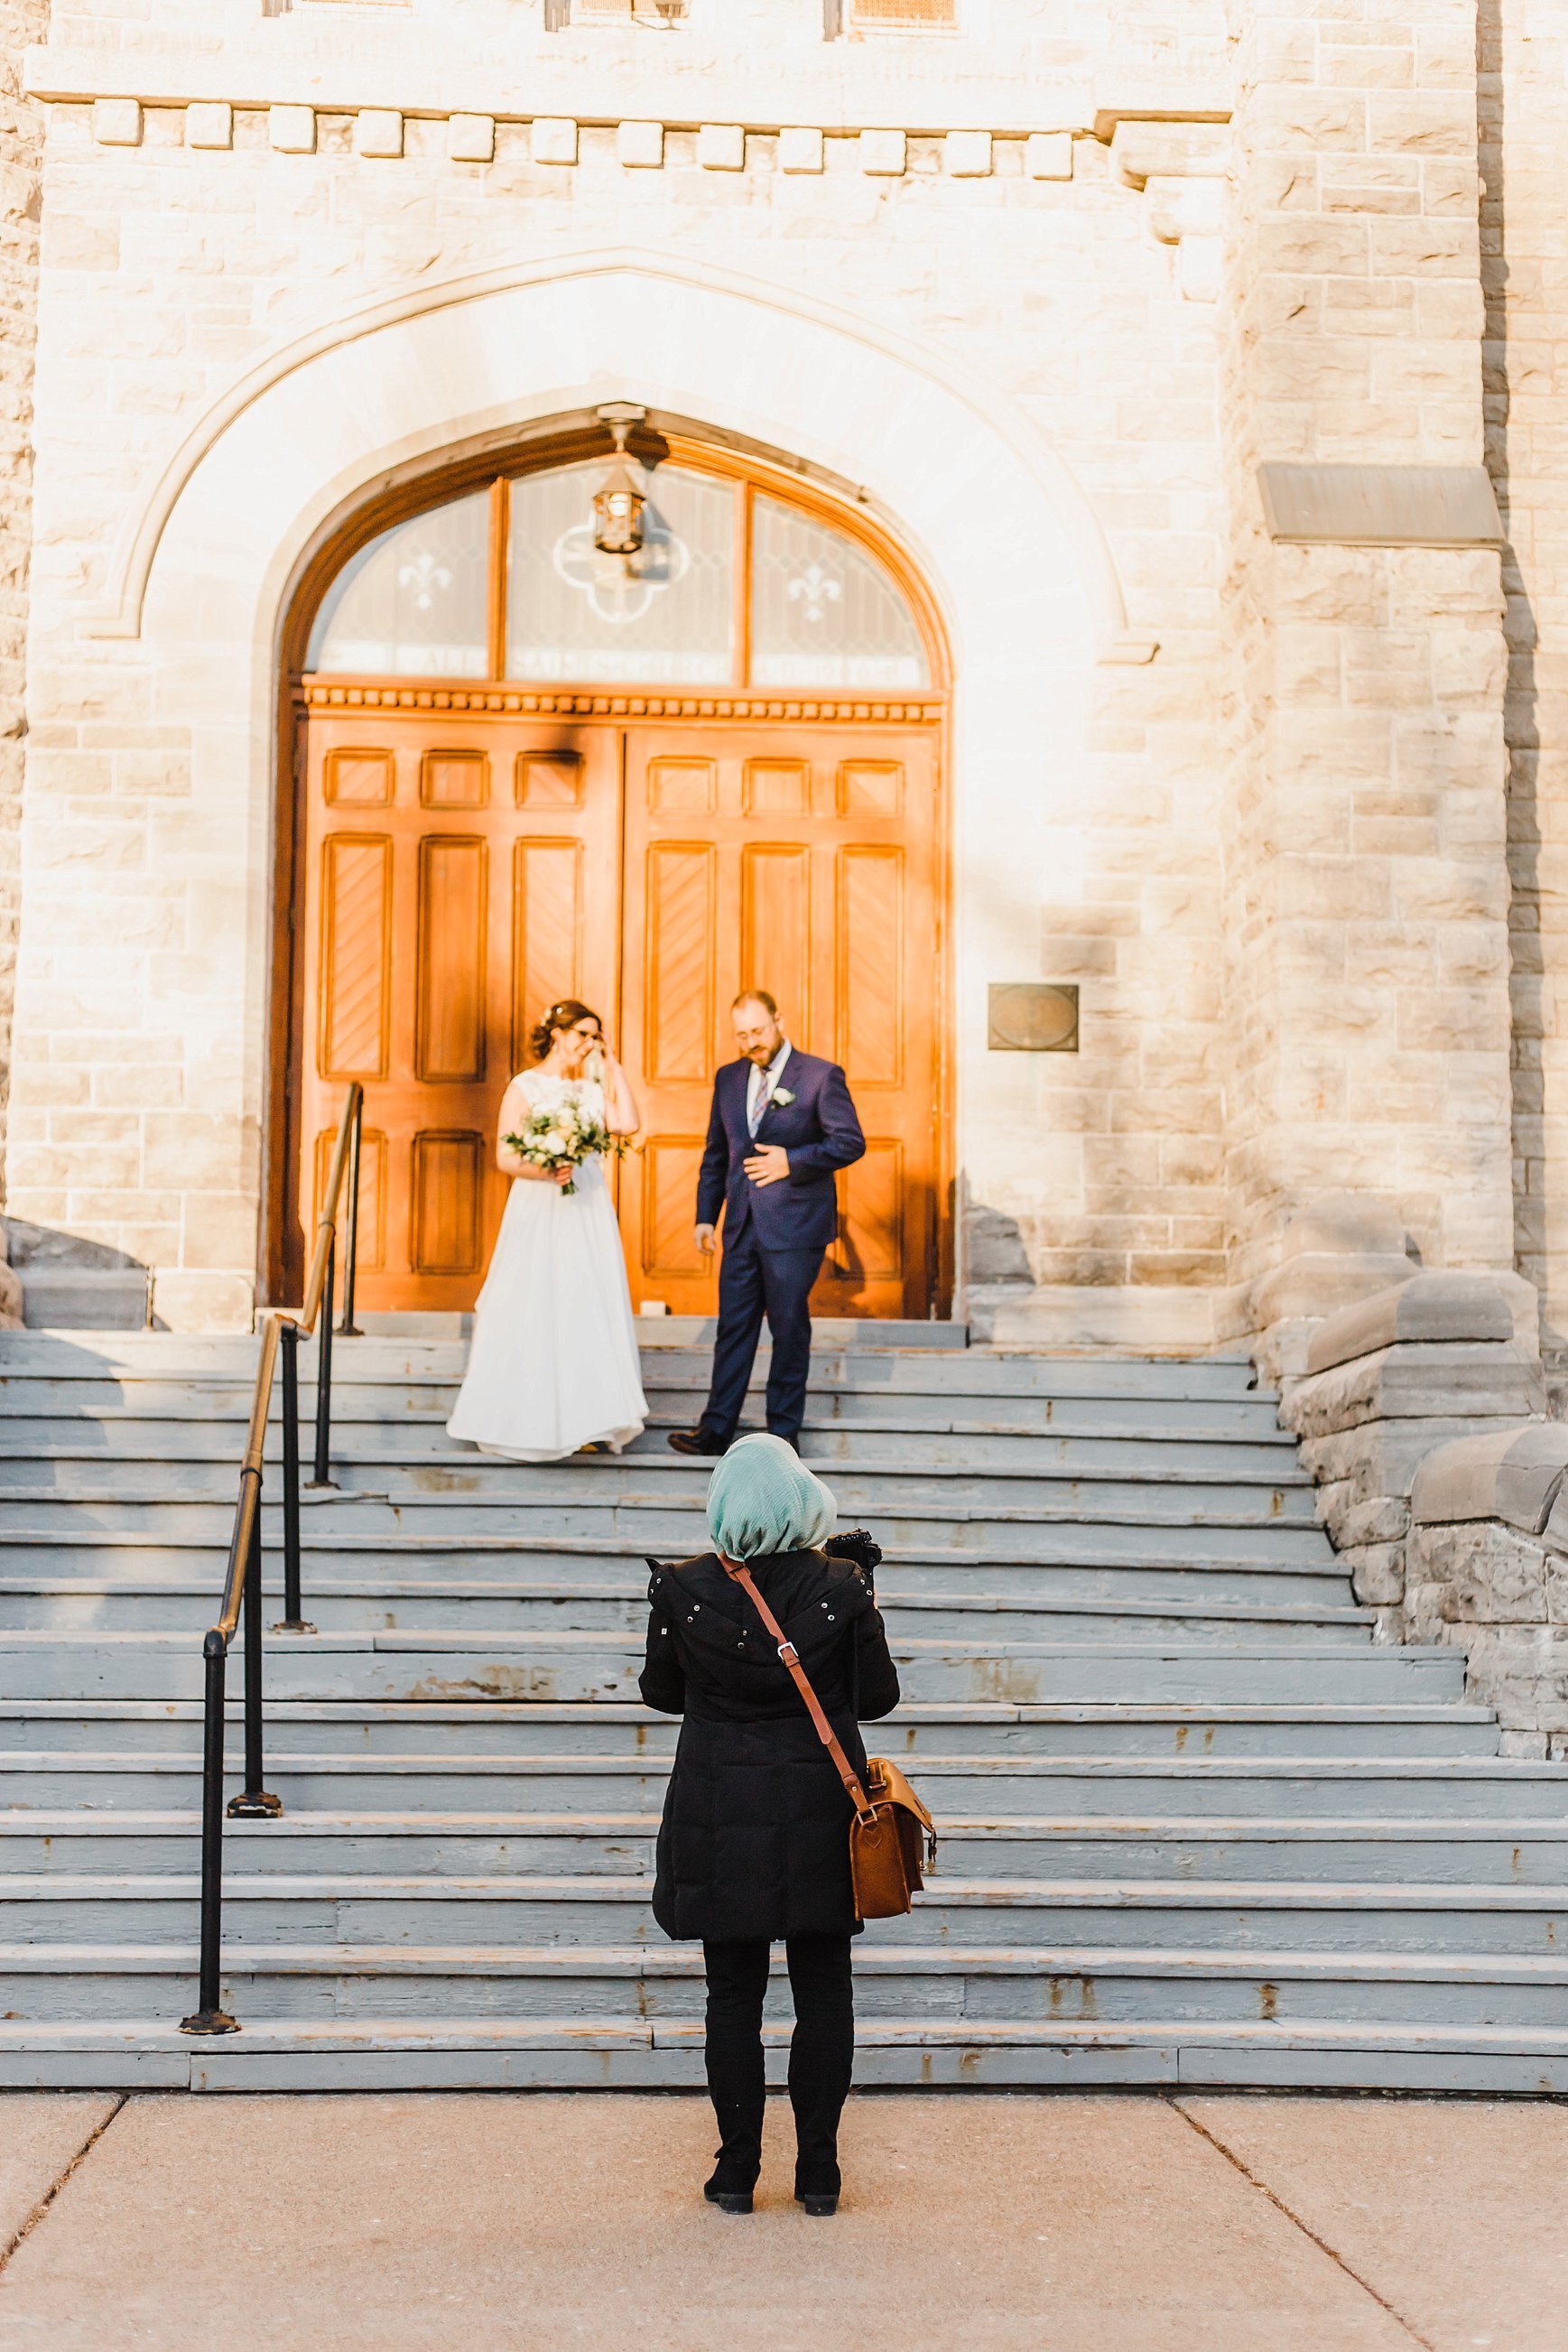  I started off my 2019 wedding season earlier than usual in March.  Winter coat: check.  Boots: check.  Pump: check.  Crazy cool cathedral wedding in downtown Ottawa: check. 